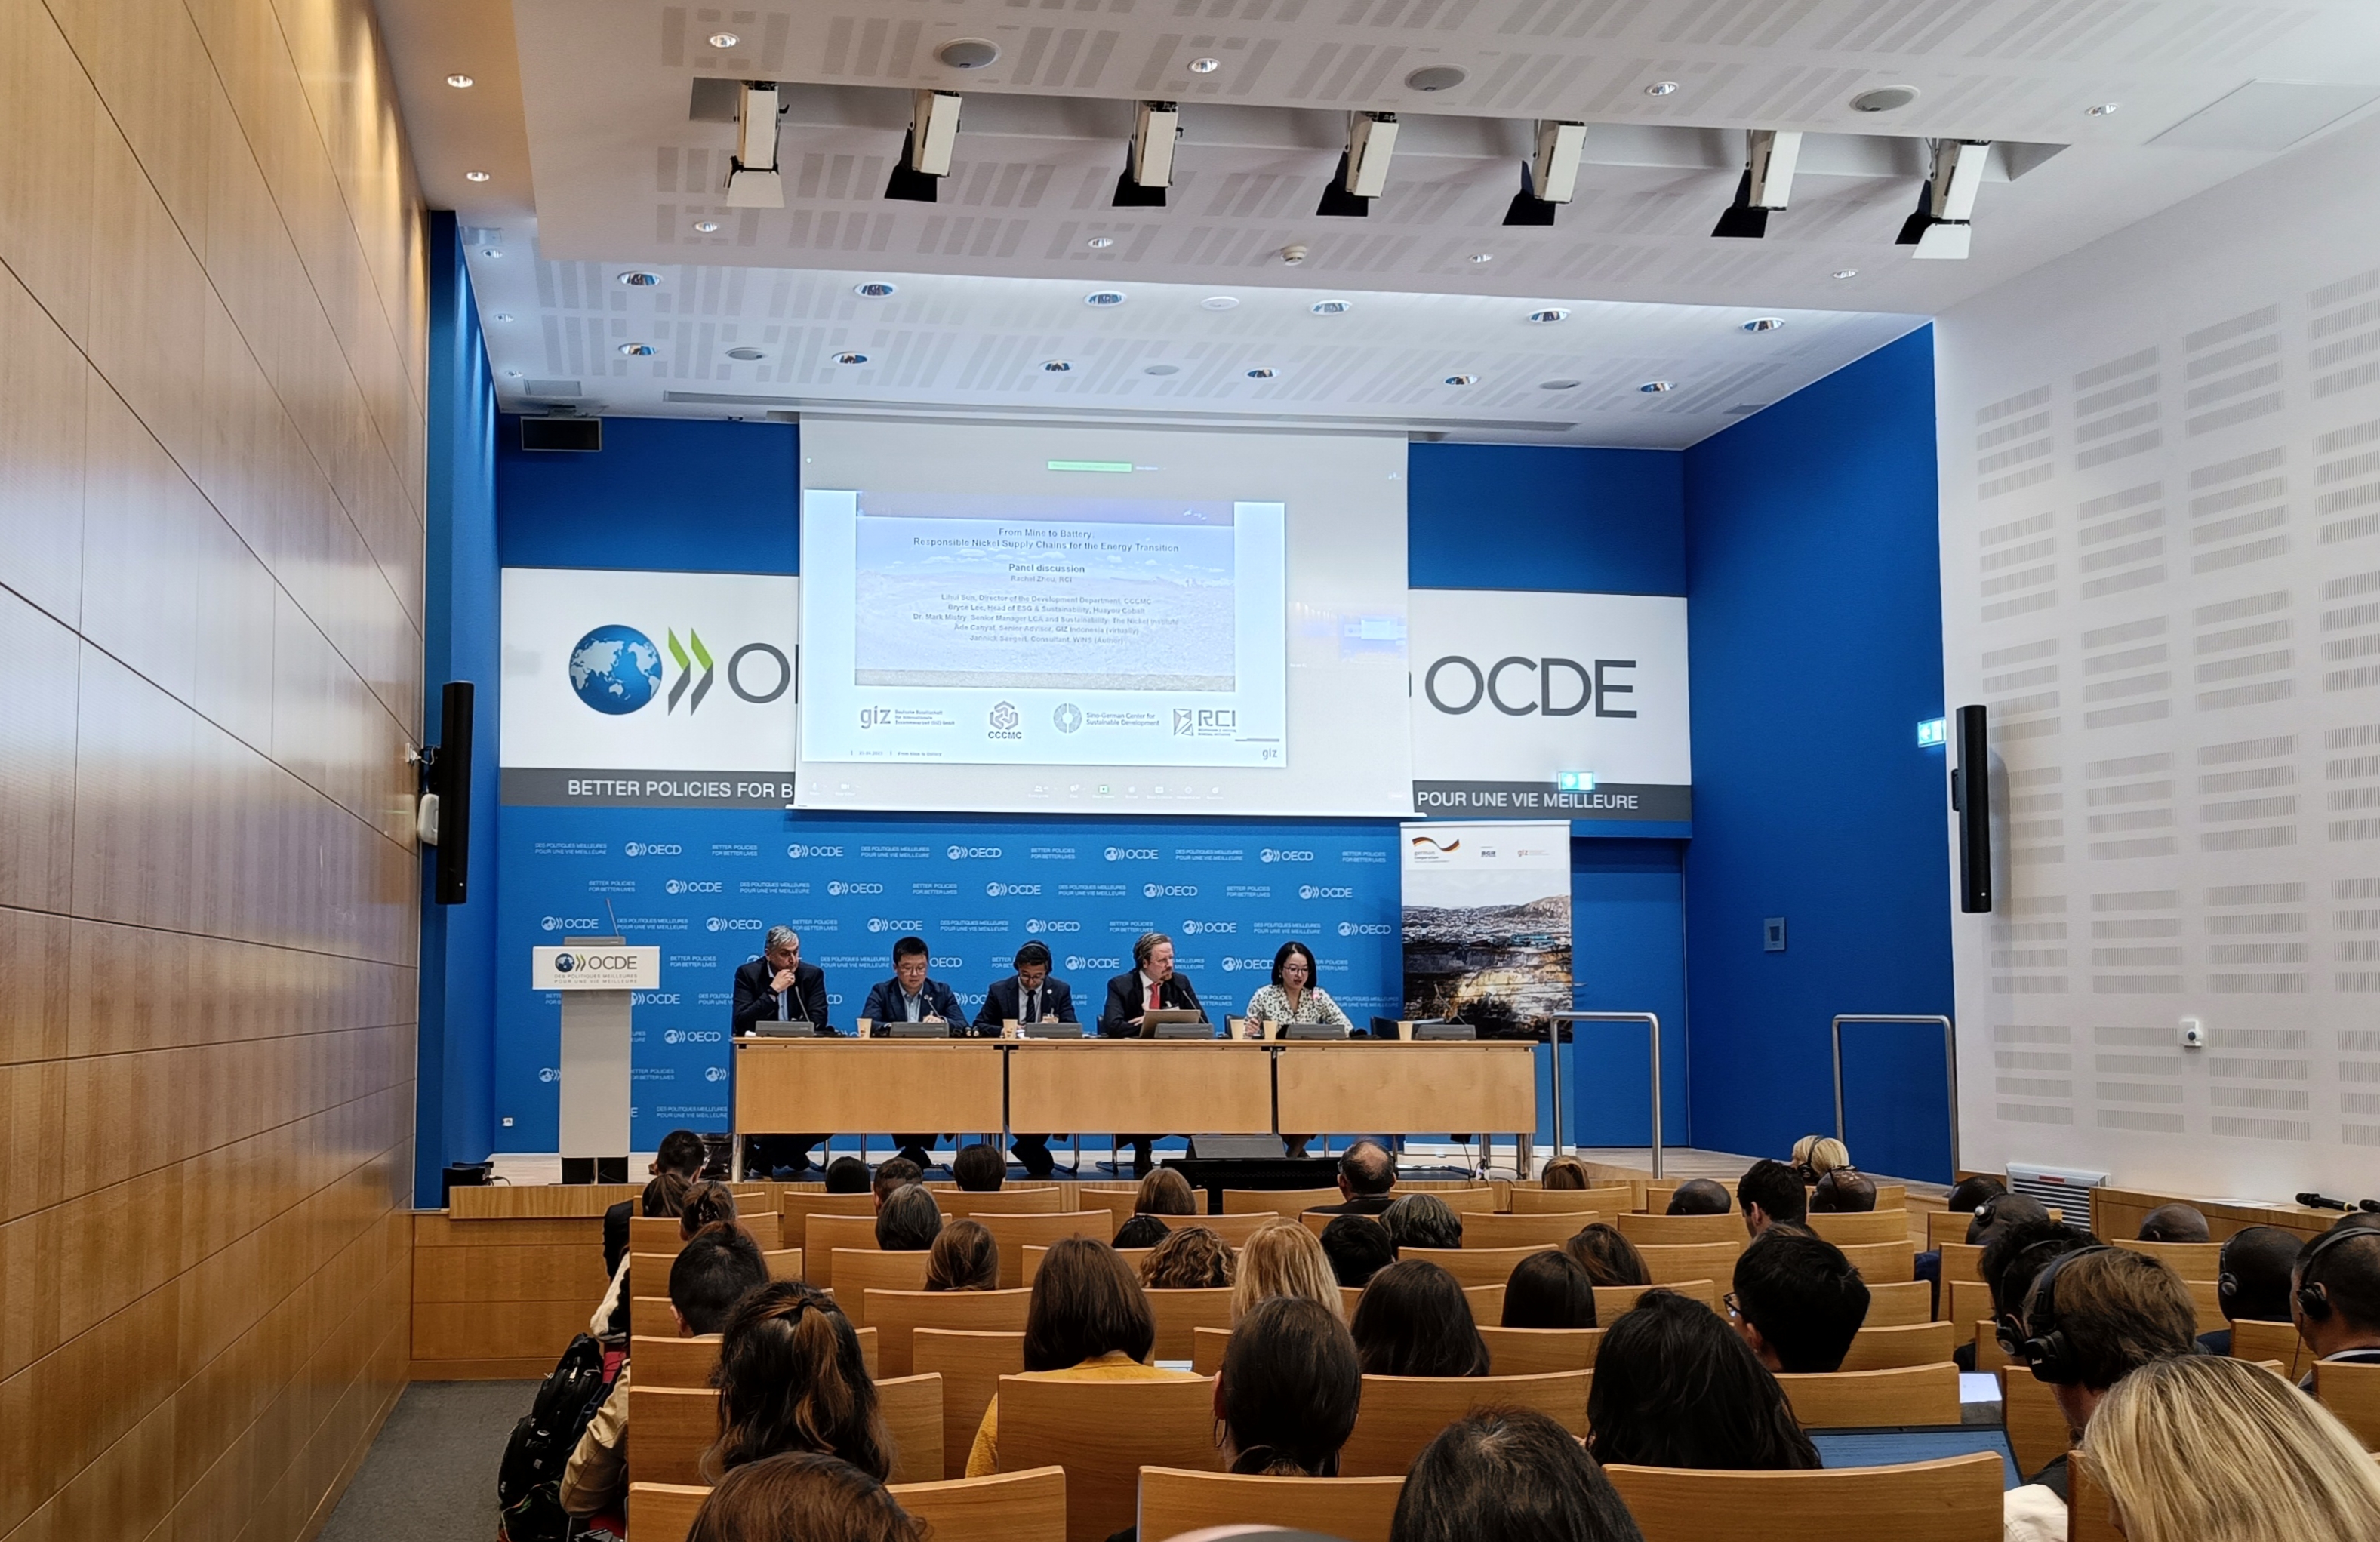 OECD Partner Session: “From Mine to Battery: Responsible Nickel Supply Chains for the Energy Transition”